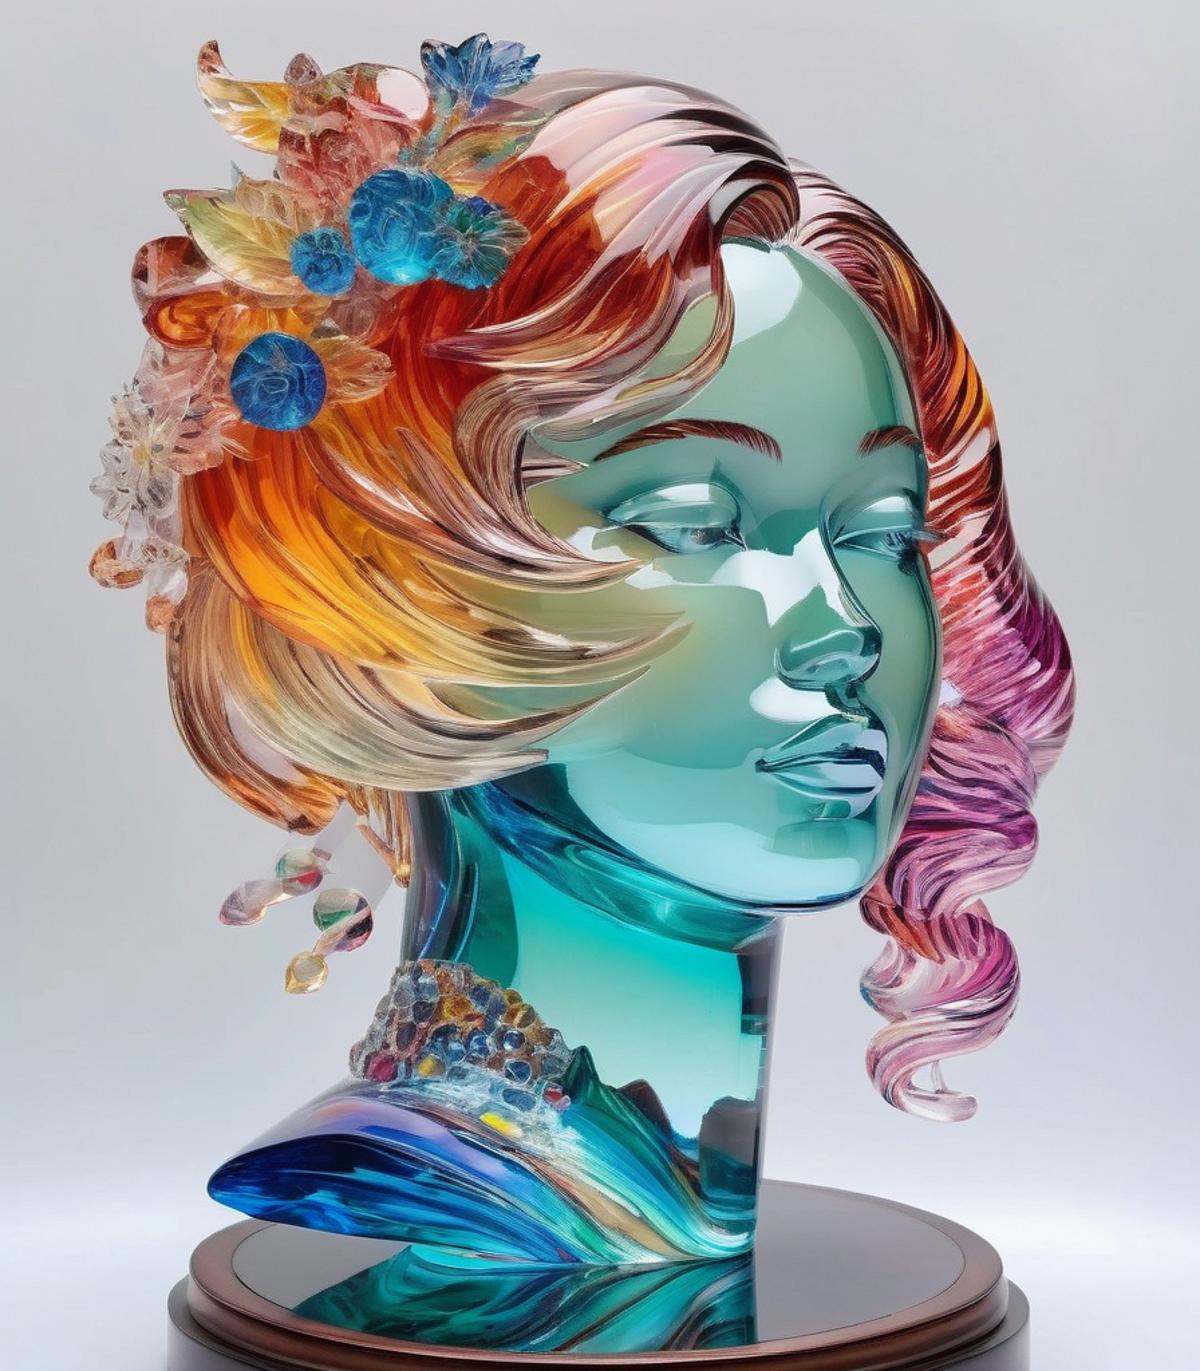 Artistic Glass Head Sculpture with Multi-Colored Flowers on Display